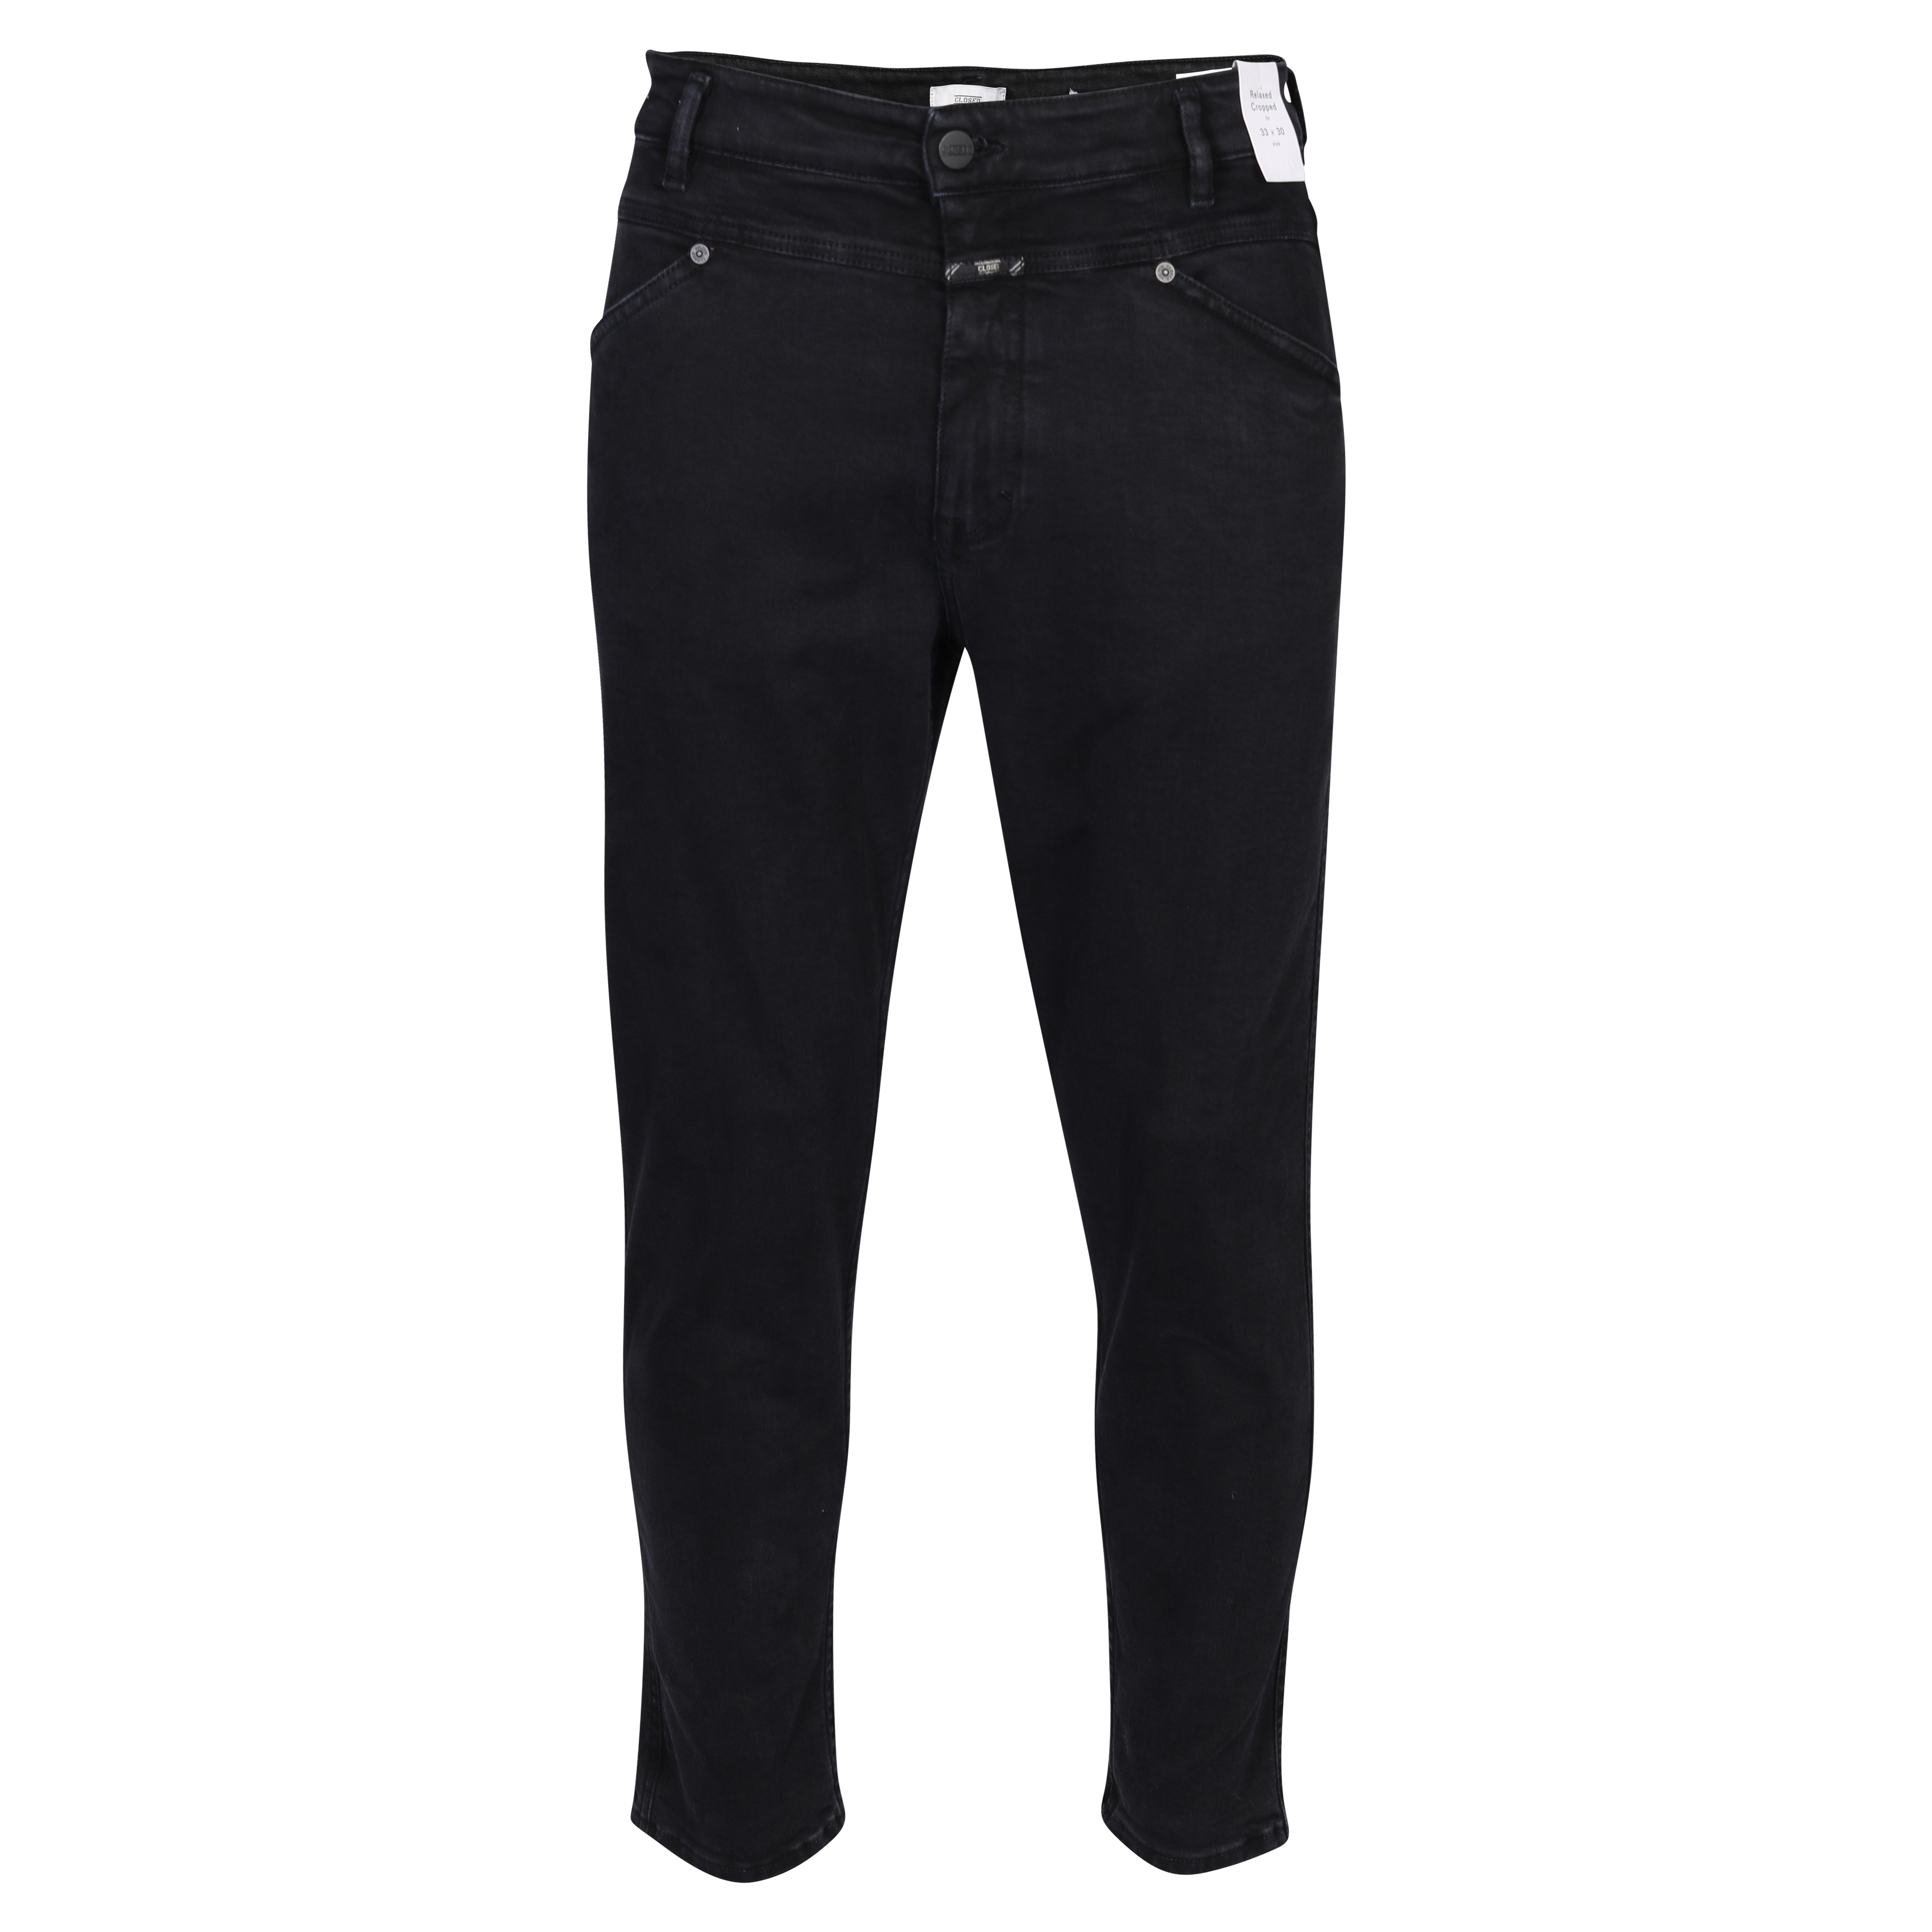 CLOSED X-Lent Tapered Jeans in Black 31